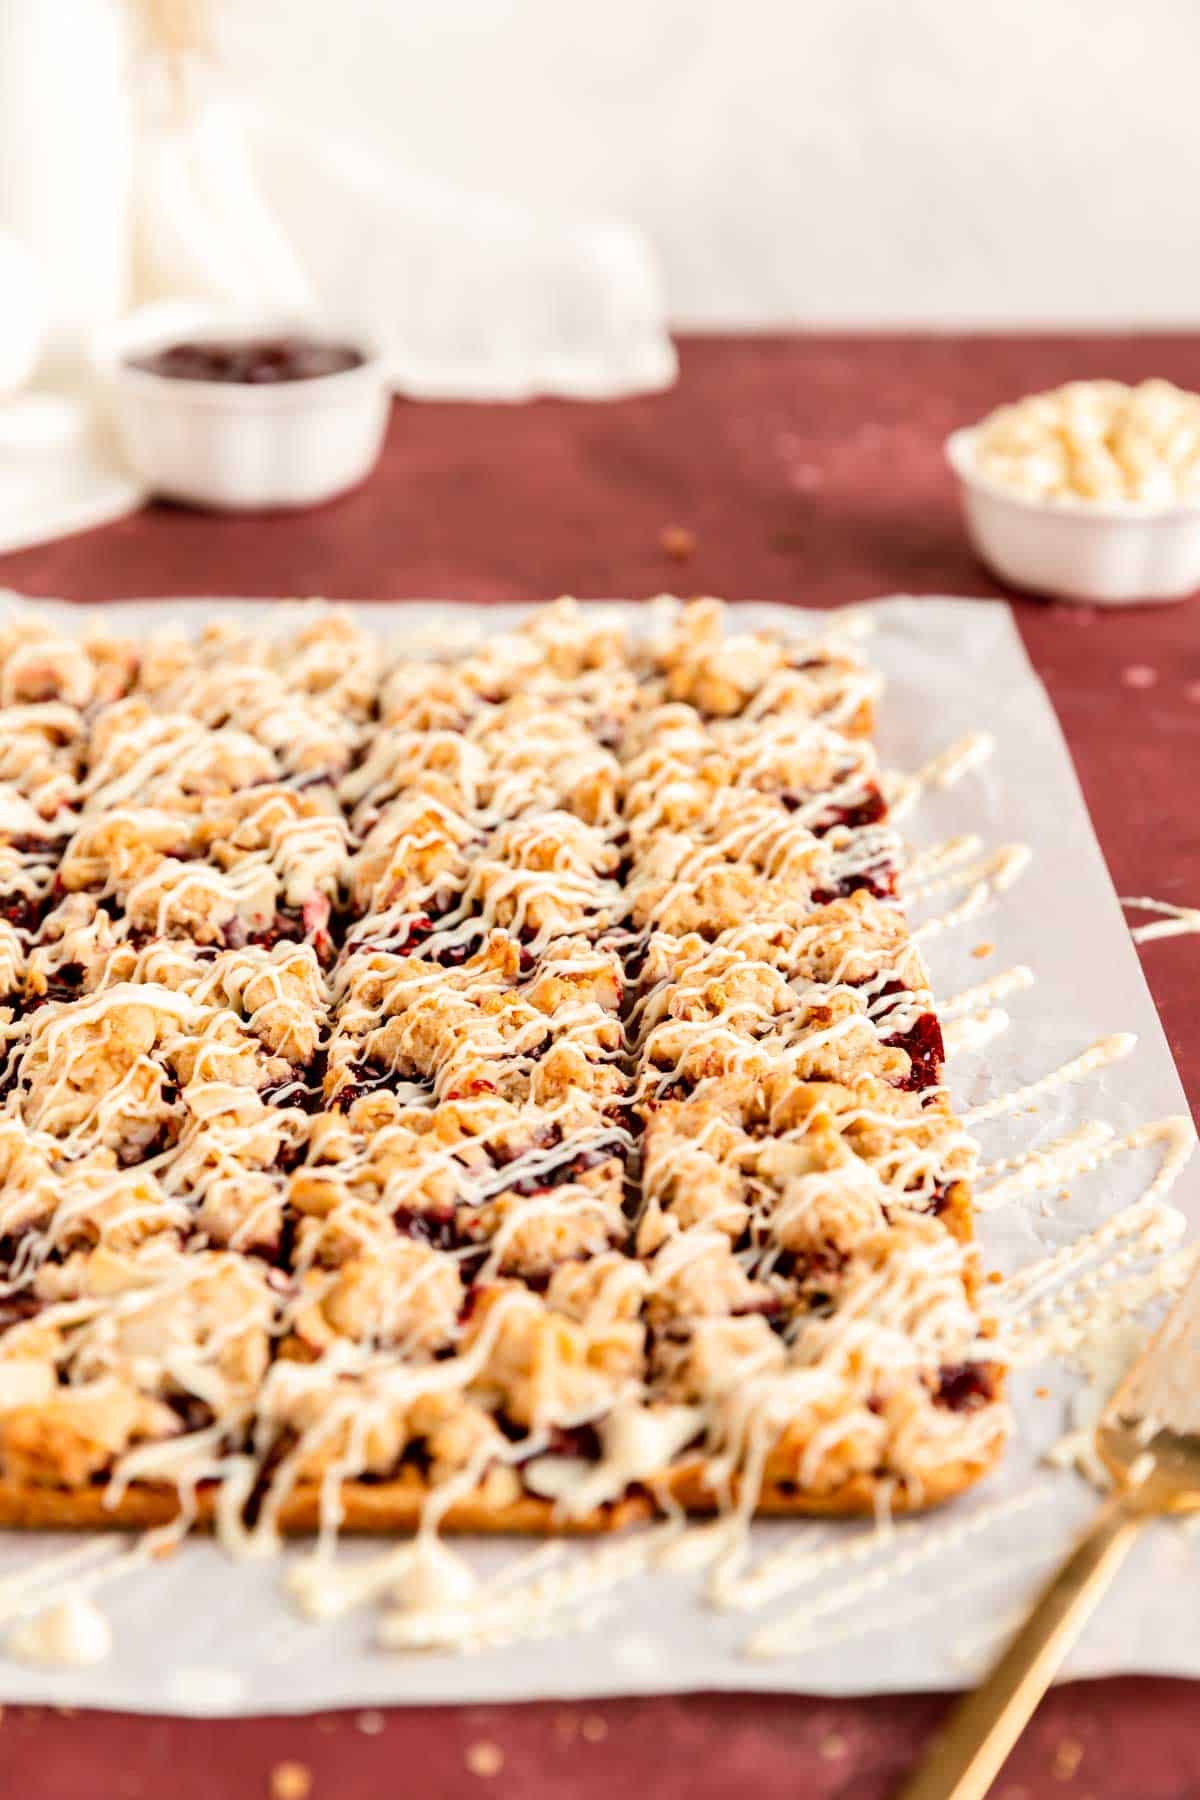 white chocolate drizzled raspberry jam bars on parchment with chocolate chips in background.